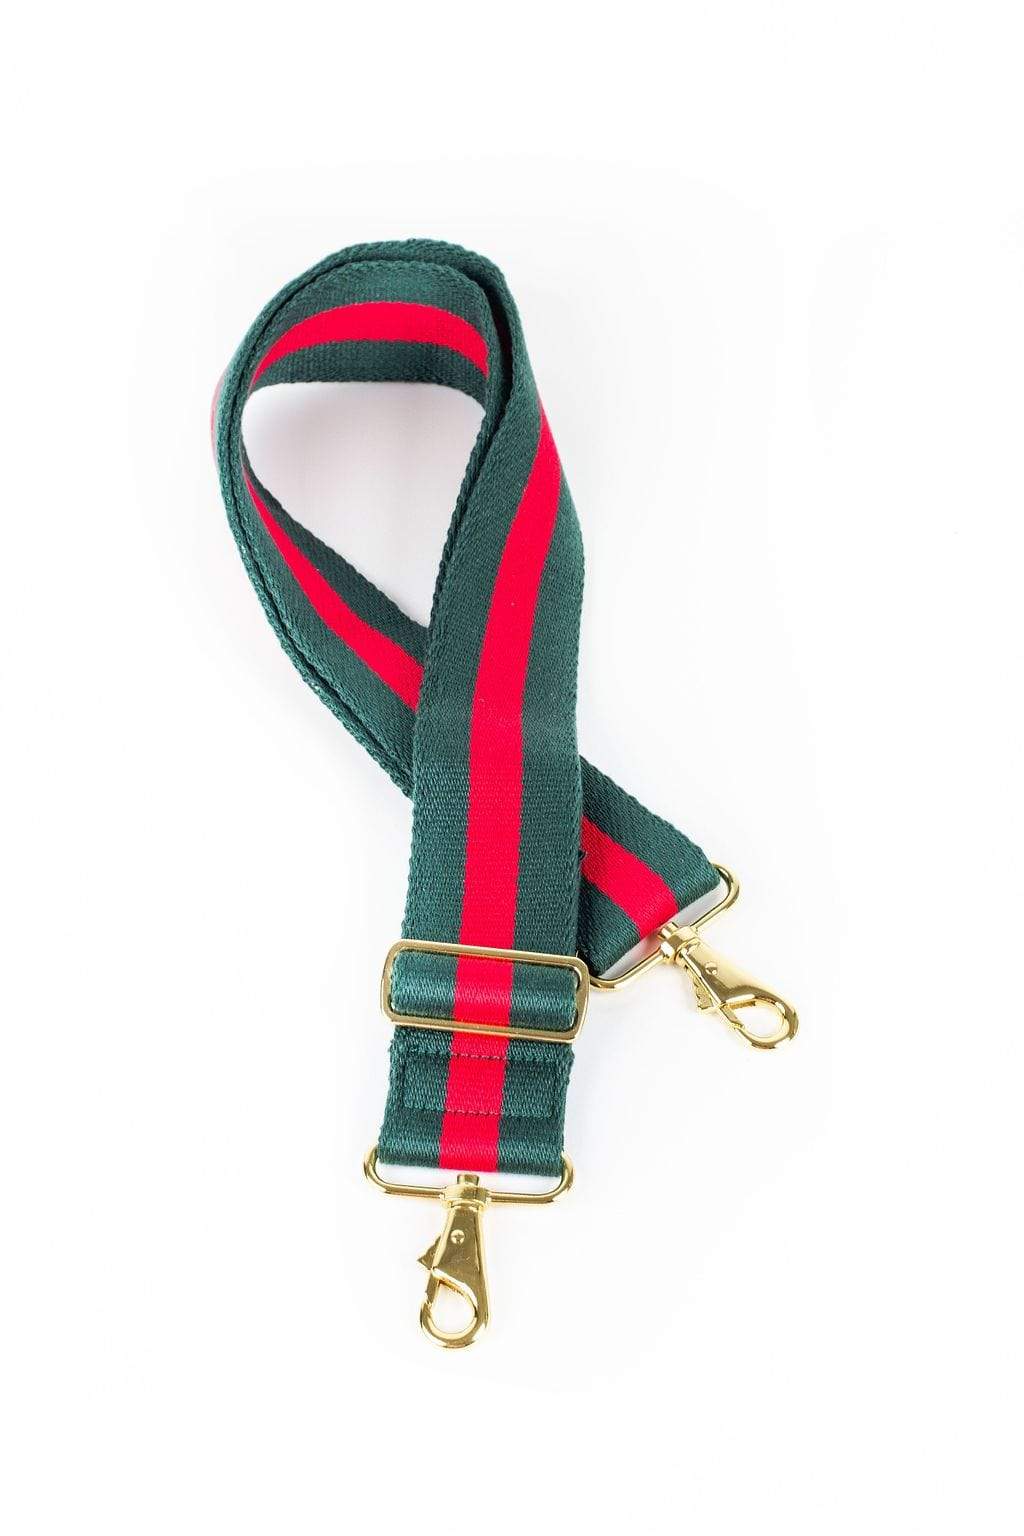 Gucci Braided bag Strap Color: Red/White for Sale in Paramount, CA - OfferUp